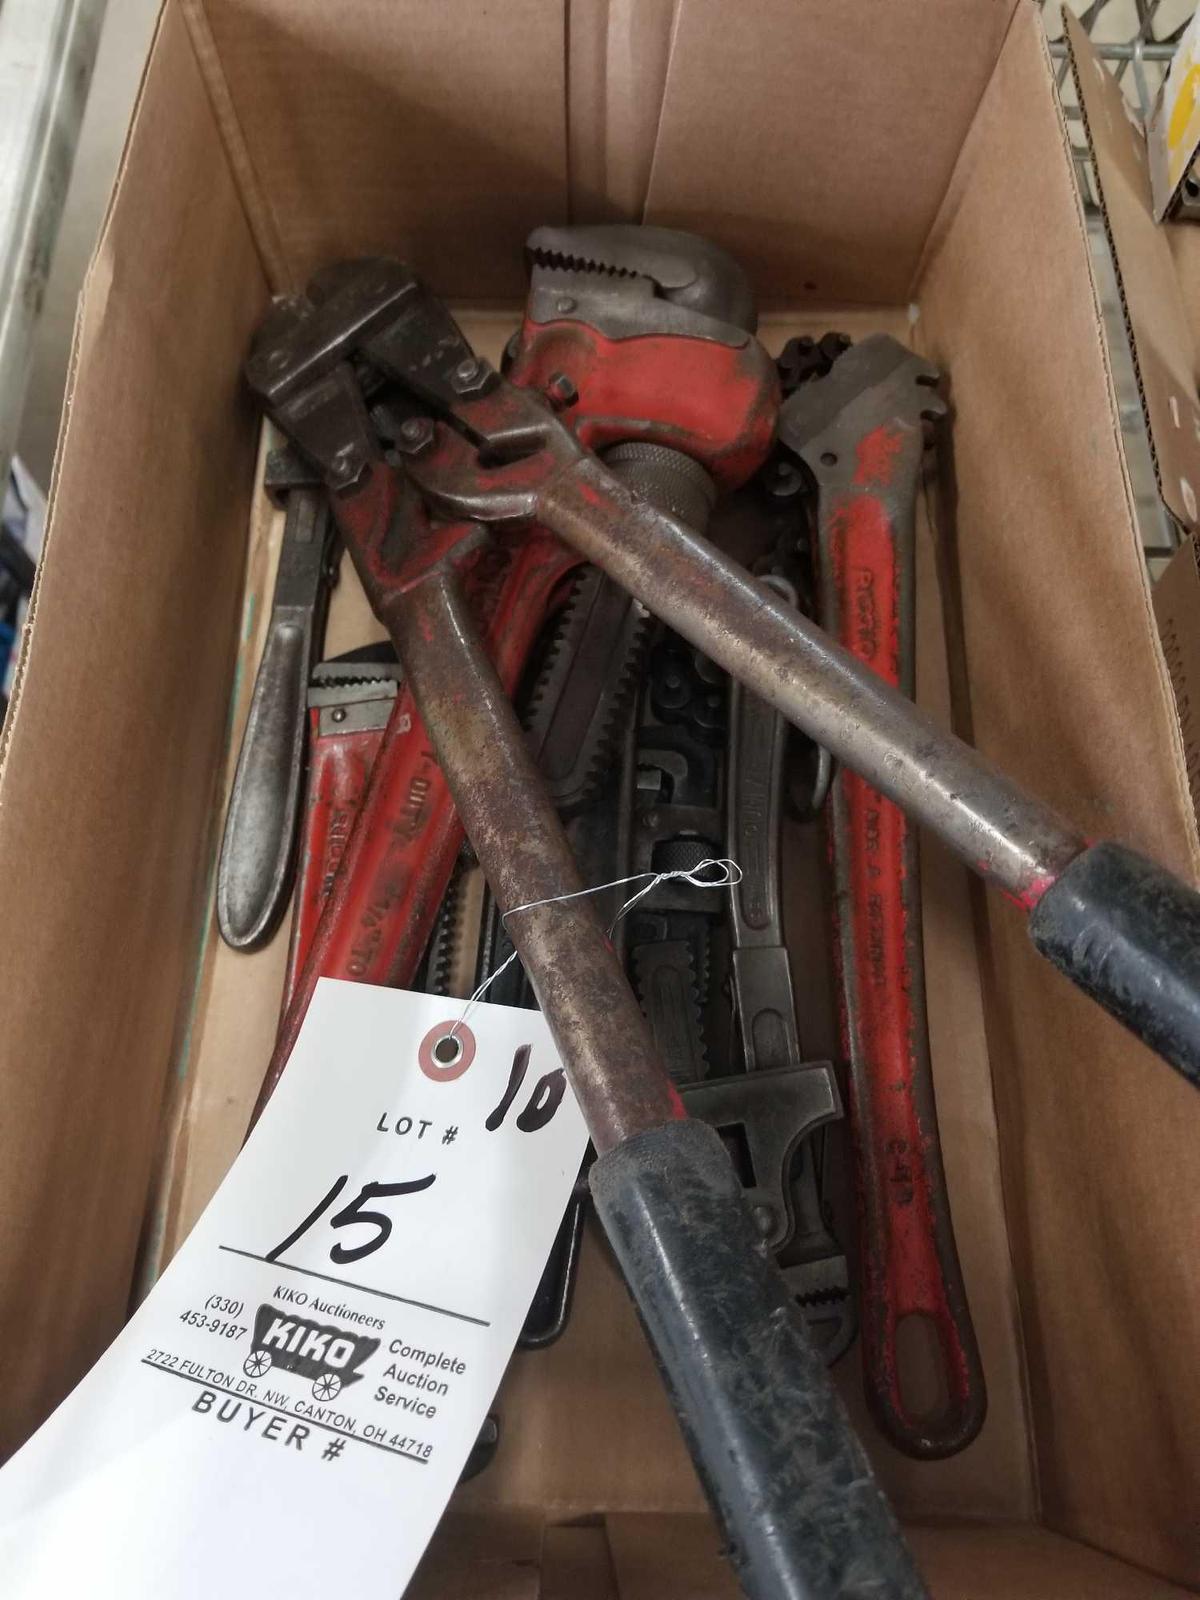 Pipe wrenches, bolt cutters